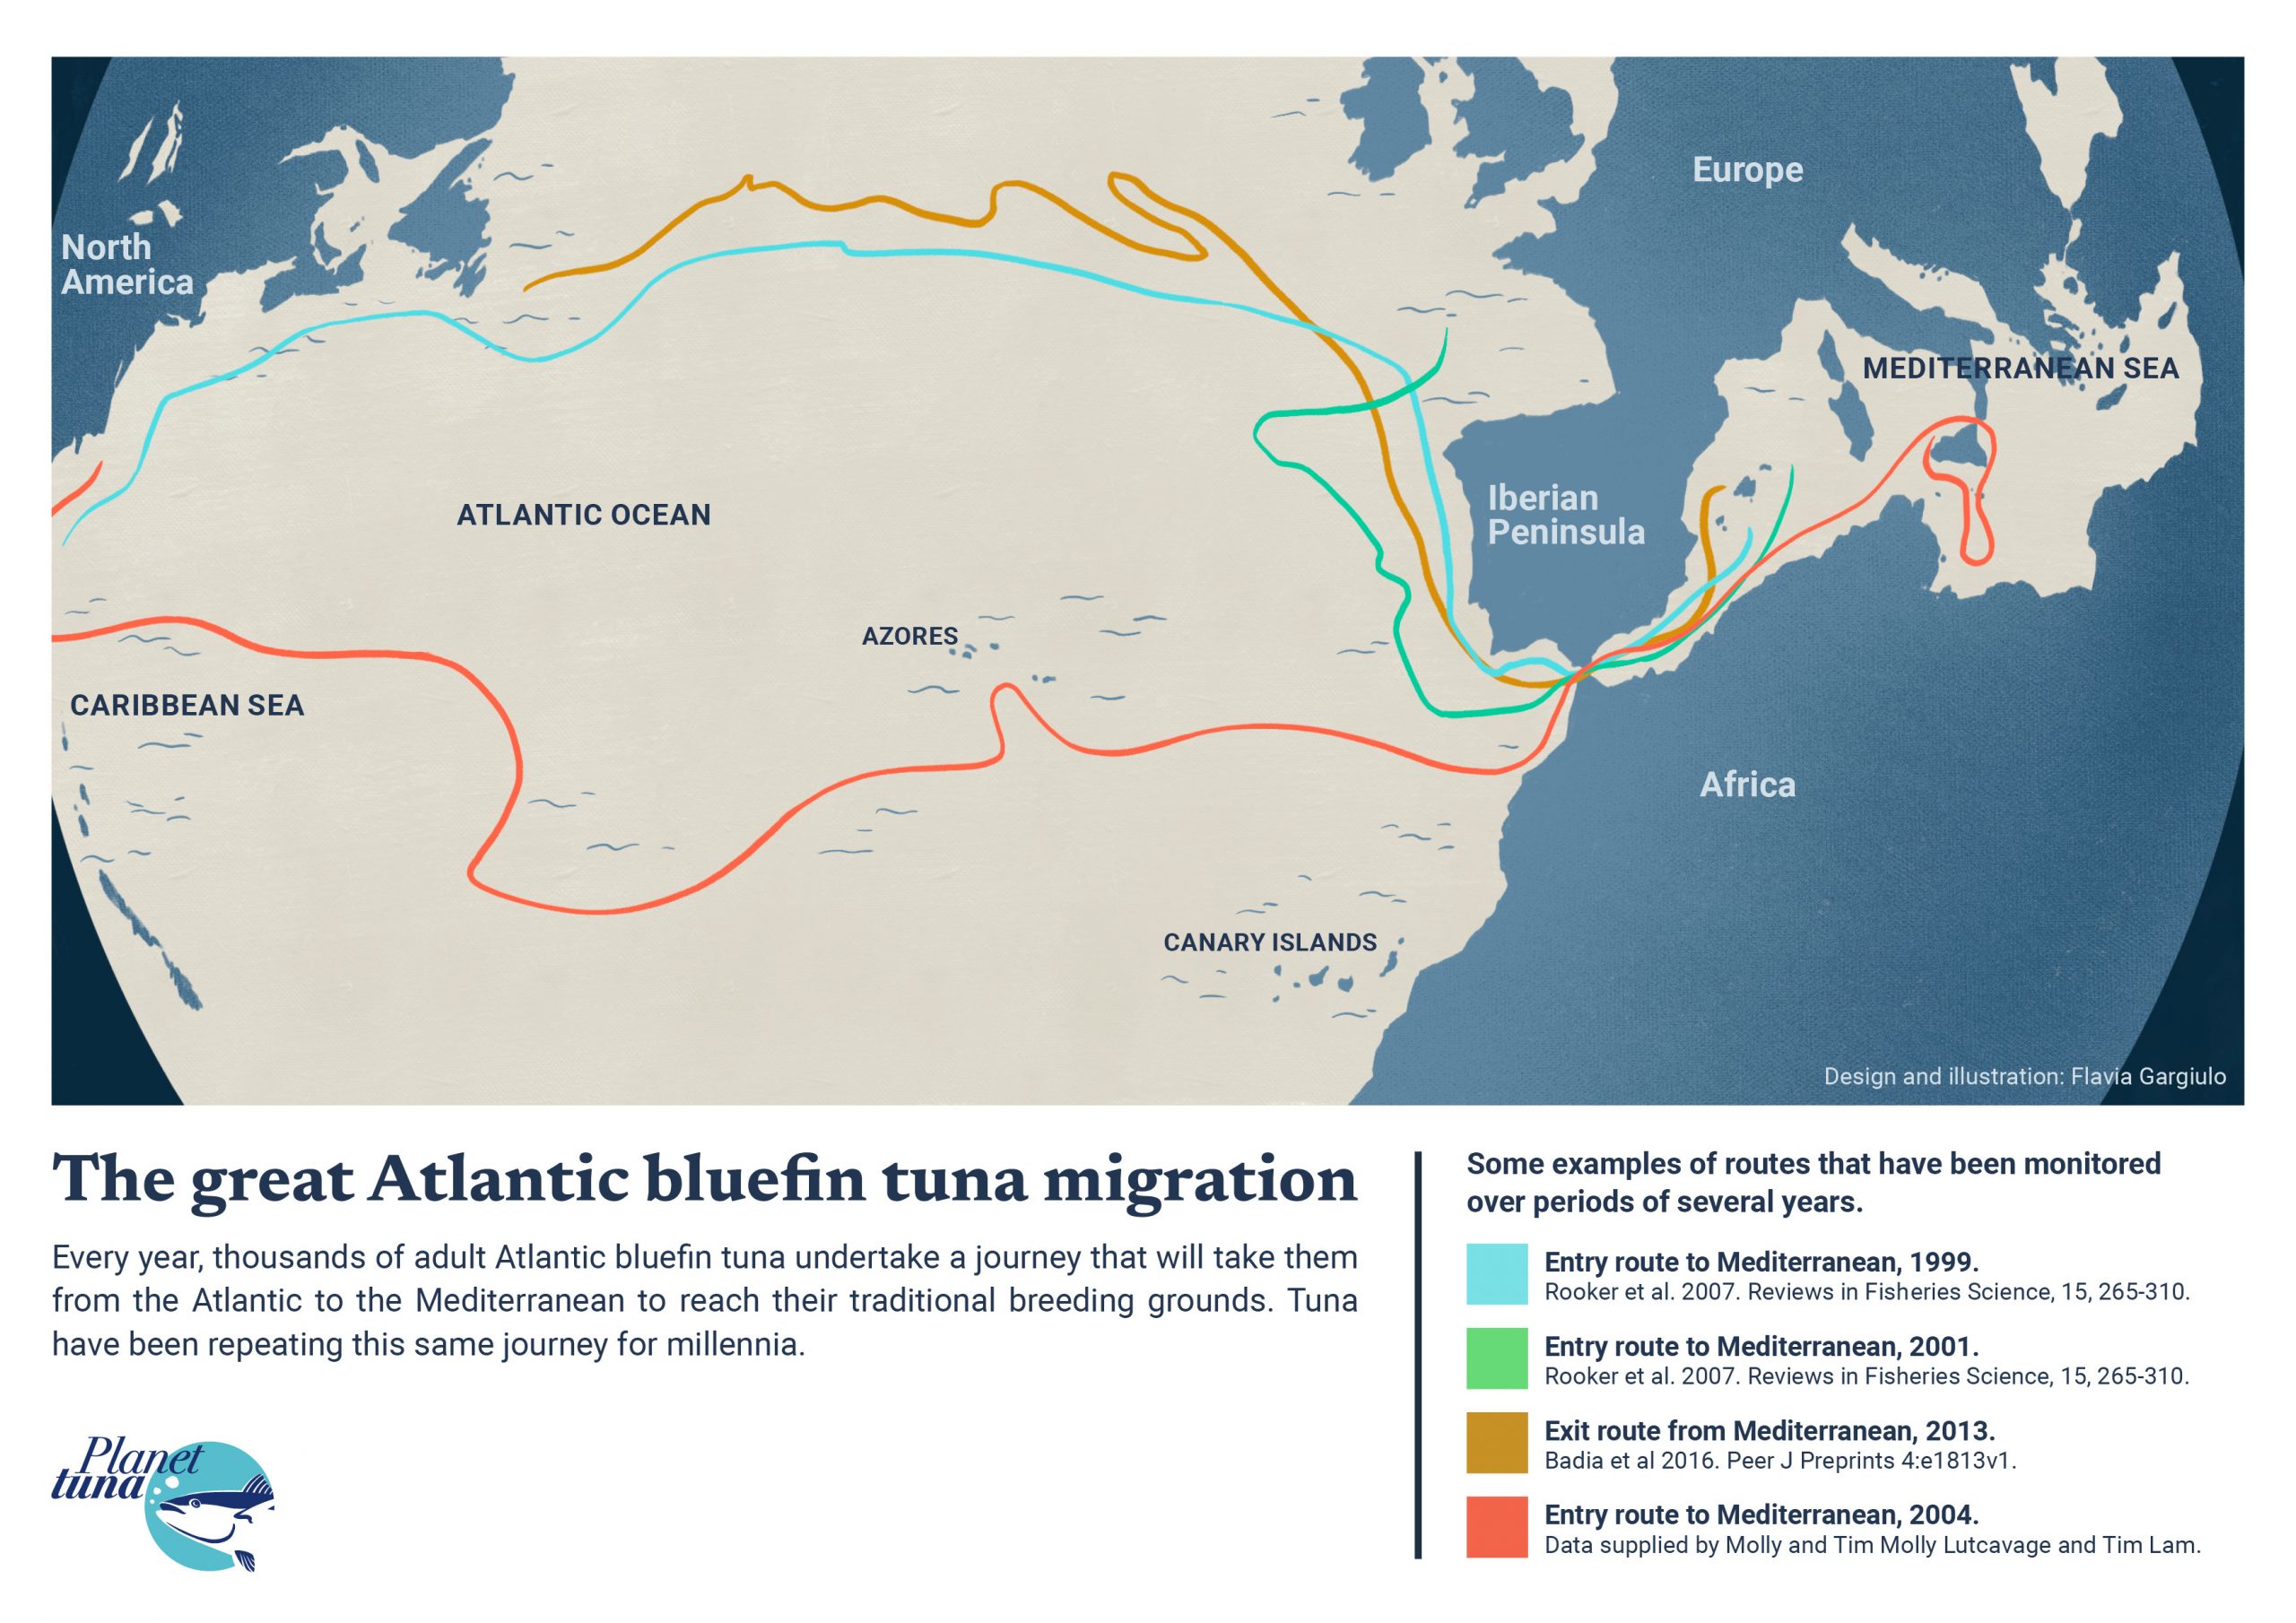 This illustration shows four examples of the routes that bluefin tuna follow from the Atlantic Ocean to reach their breeding grounds in the Mediterranean Sea.